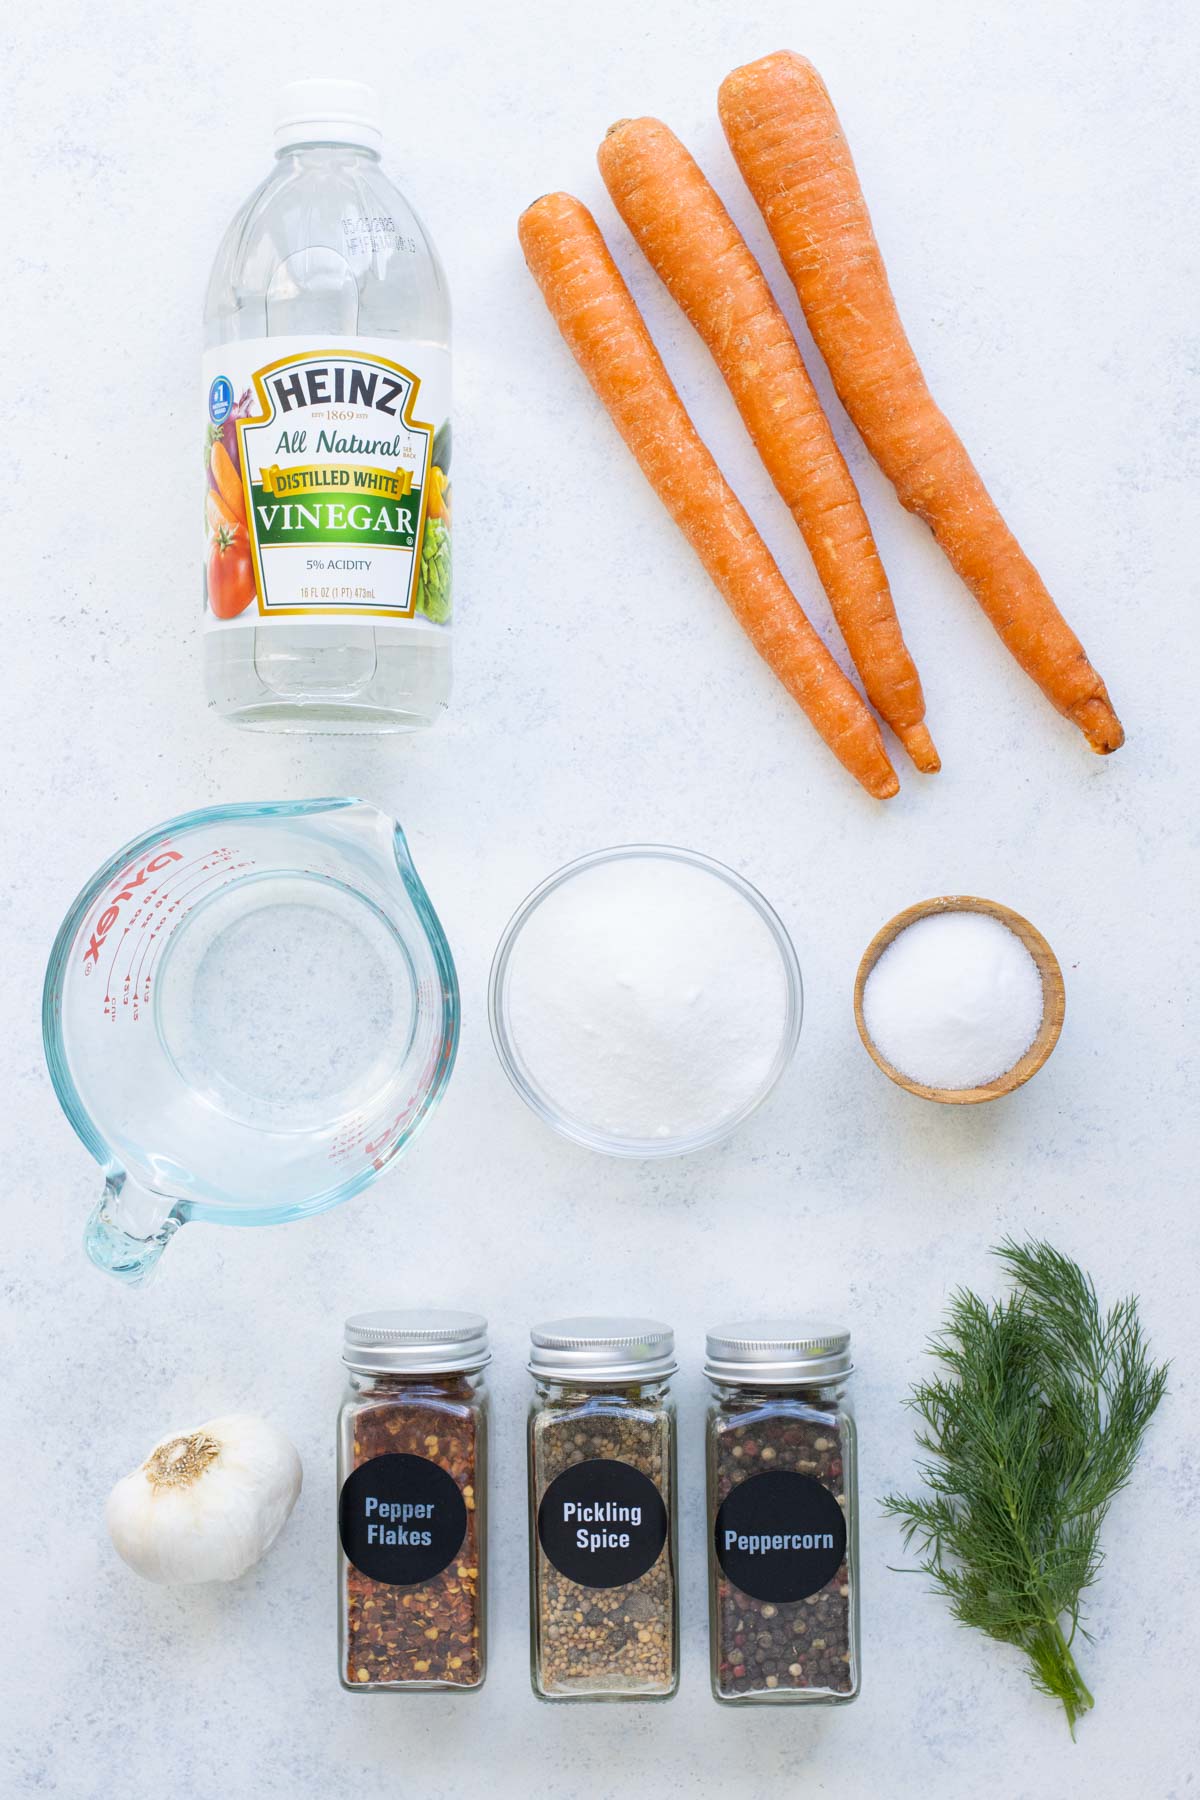 Carrots, vinegar, salt, sugar, dill, and seasonings are the ingredients for pickled carrots.